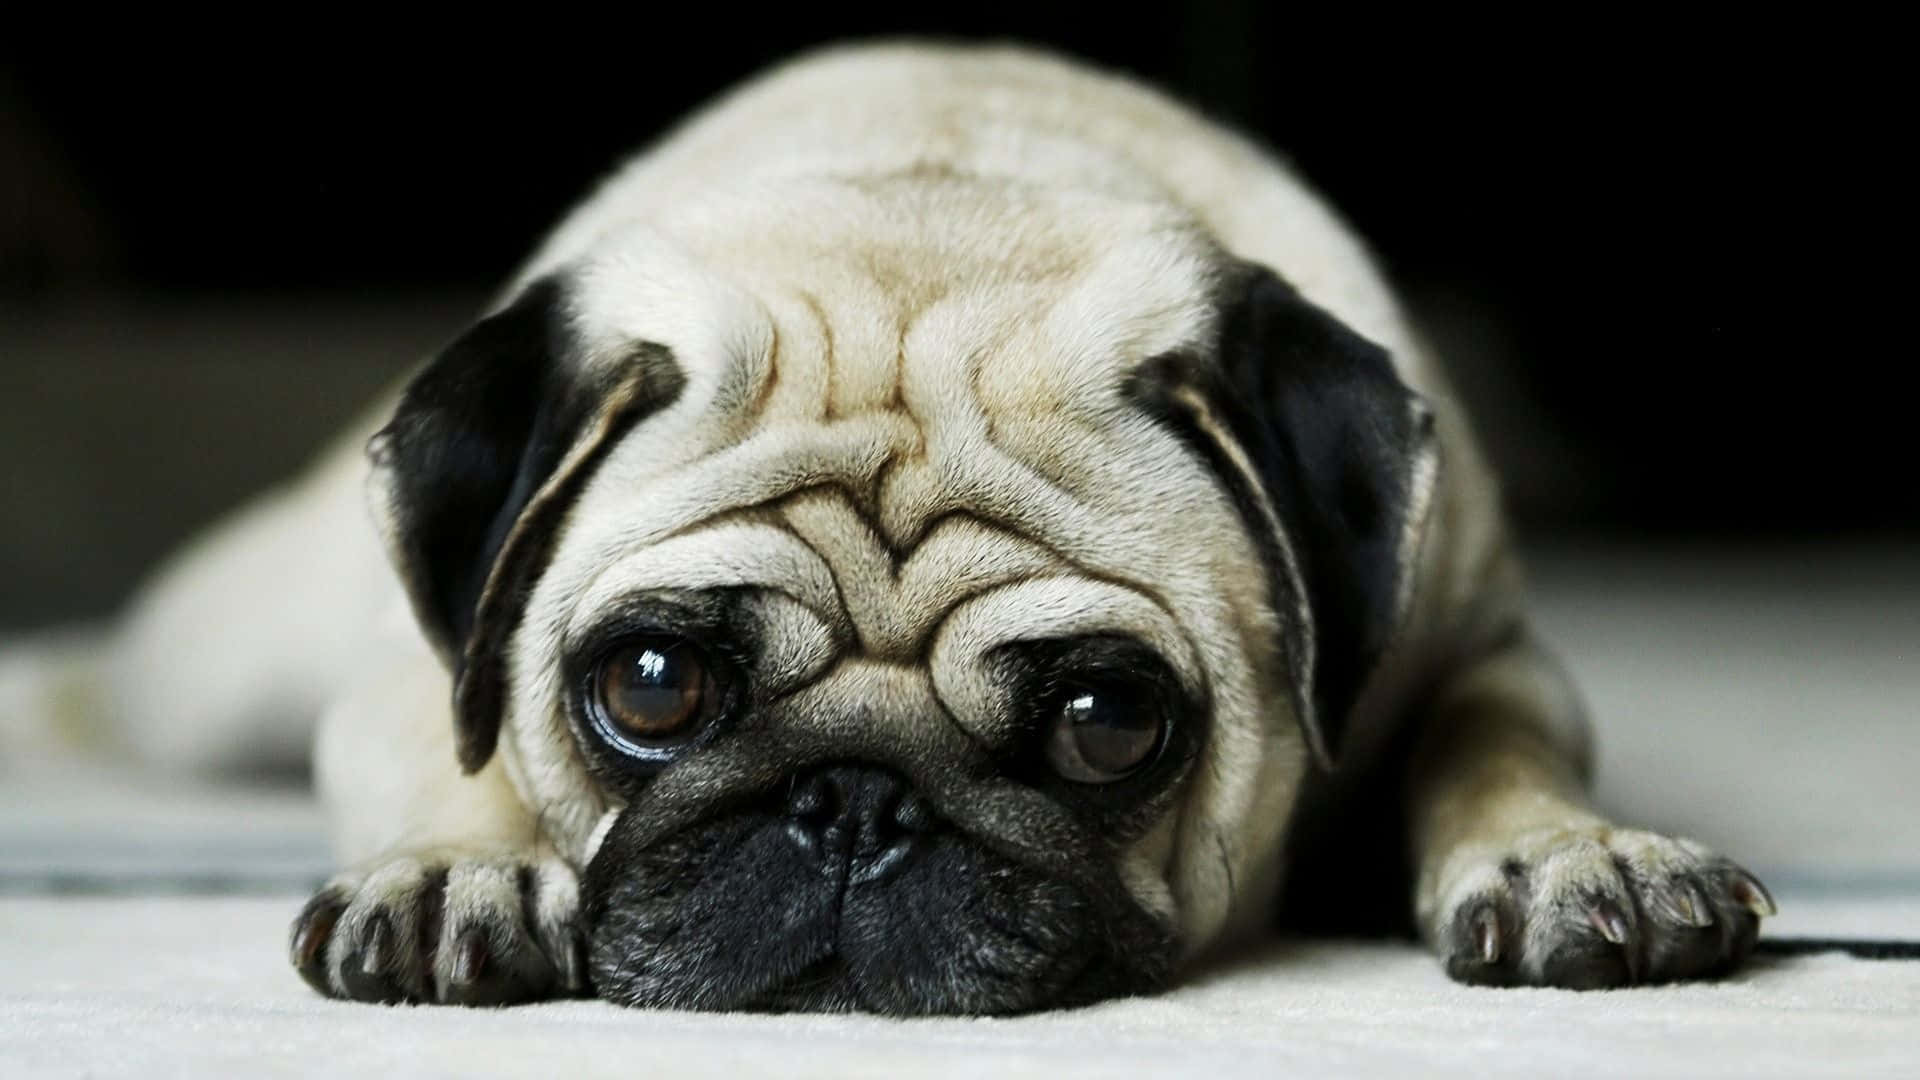 A Pug Dog Laying On The Floor With Its Eyes Closed